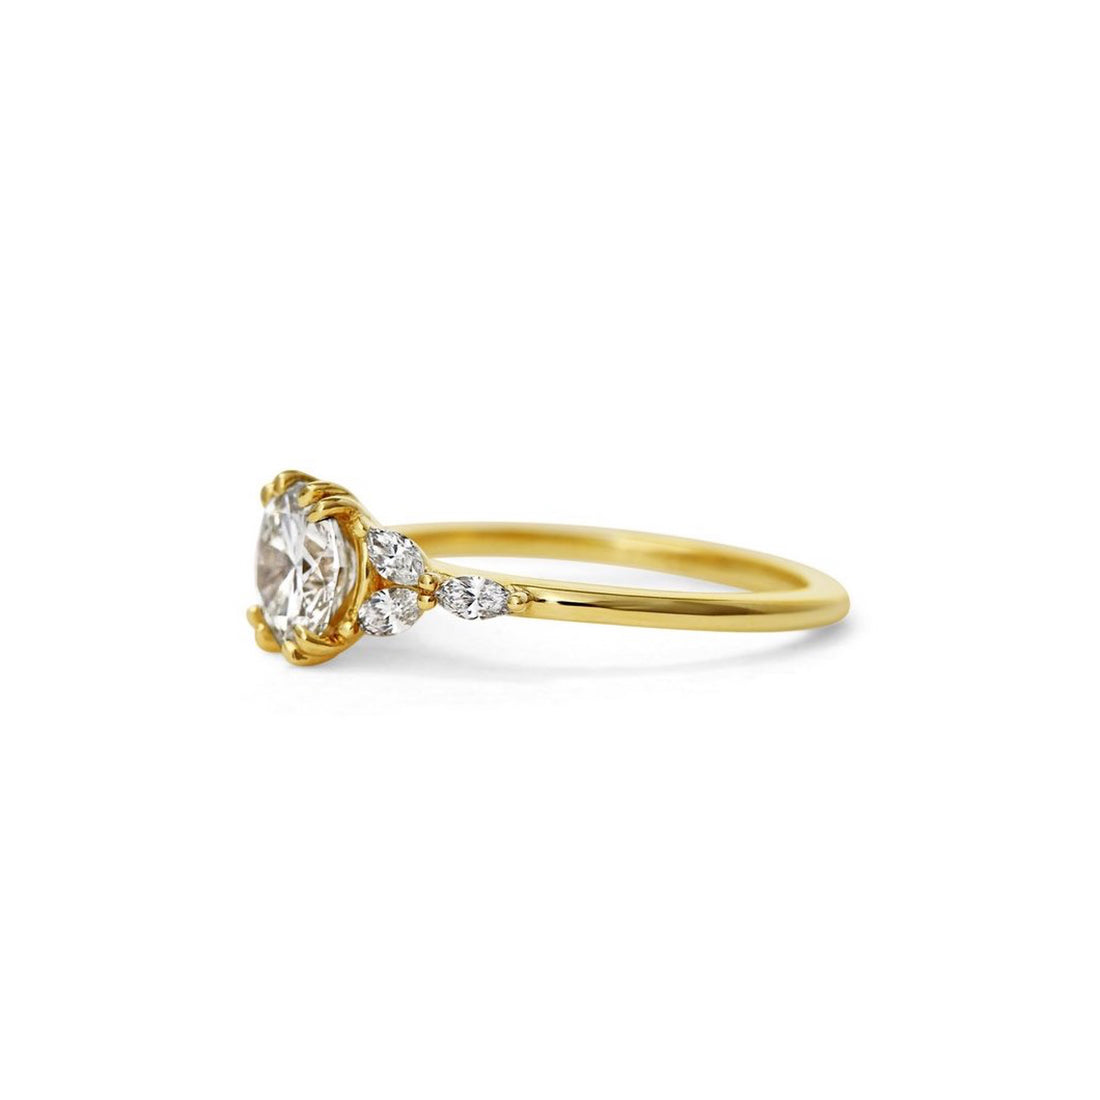  Signature Diamond Set Engagement Ring by Michelle Oh | The Cut London